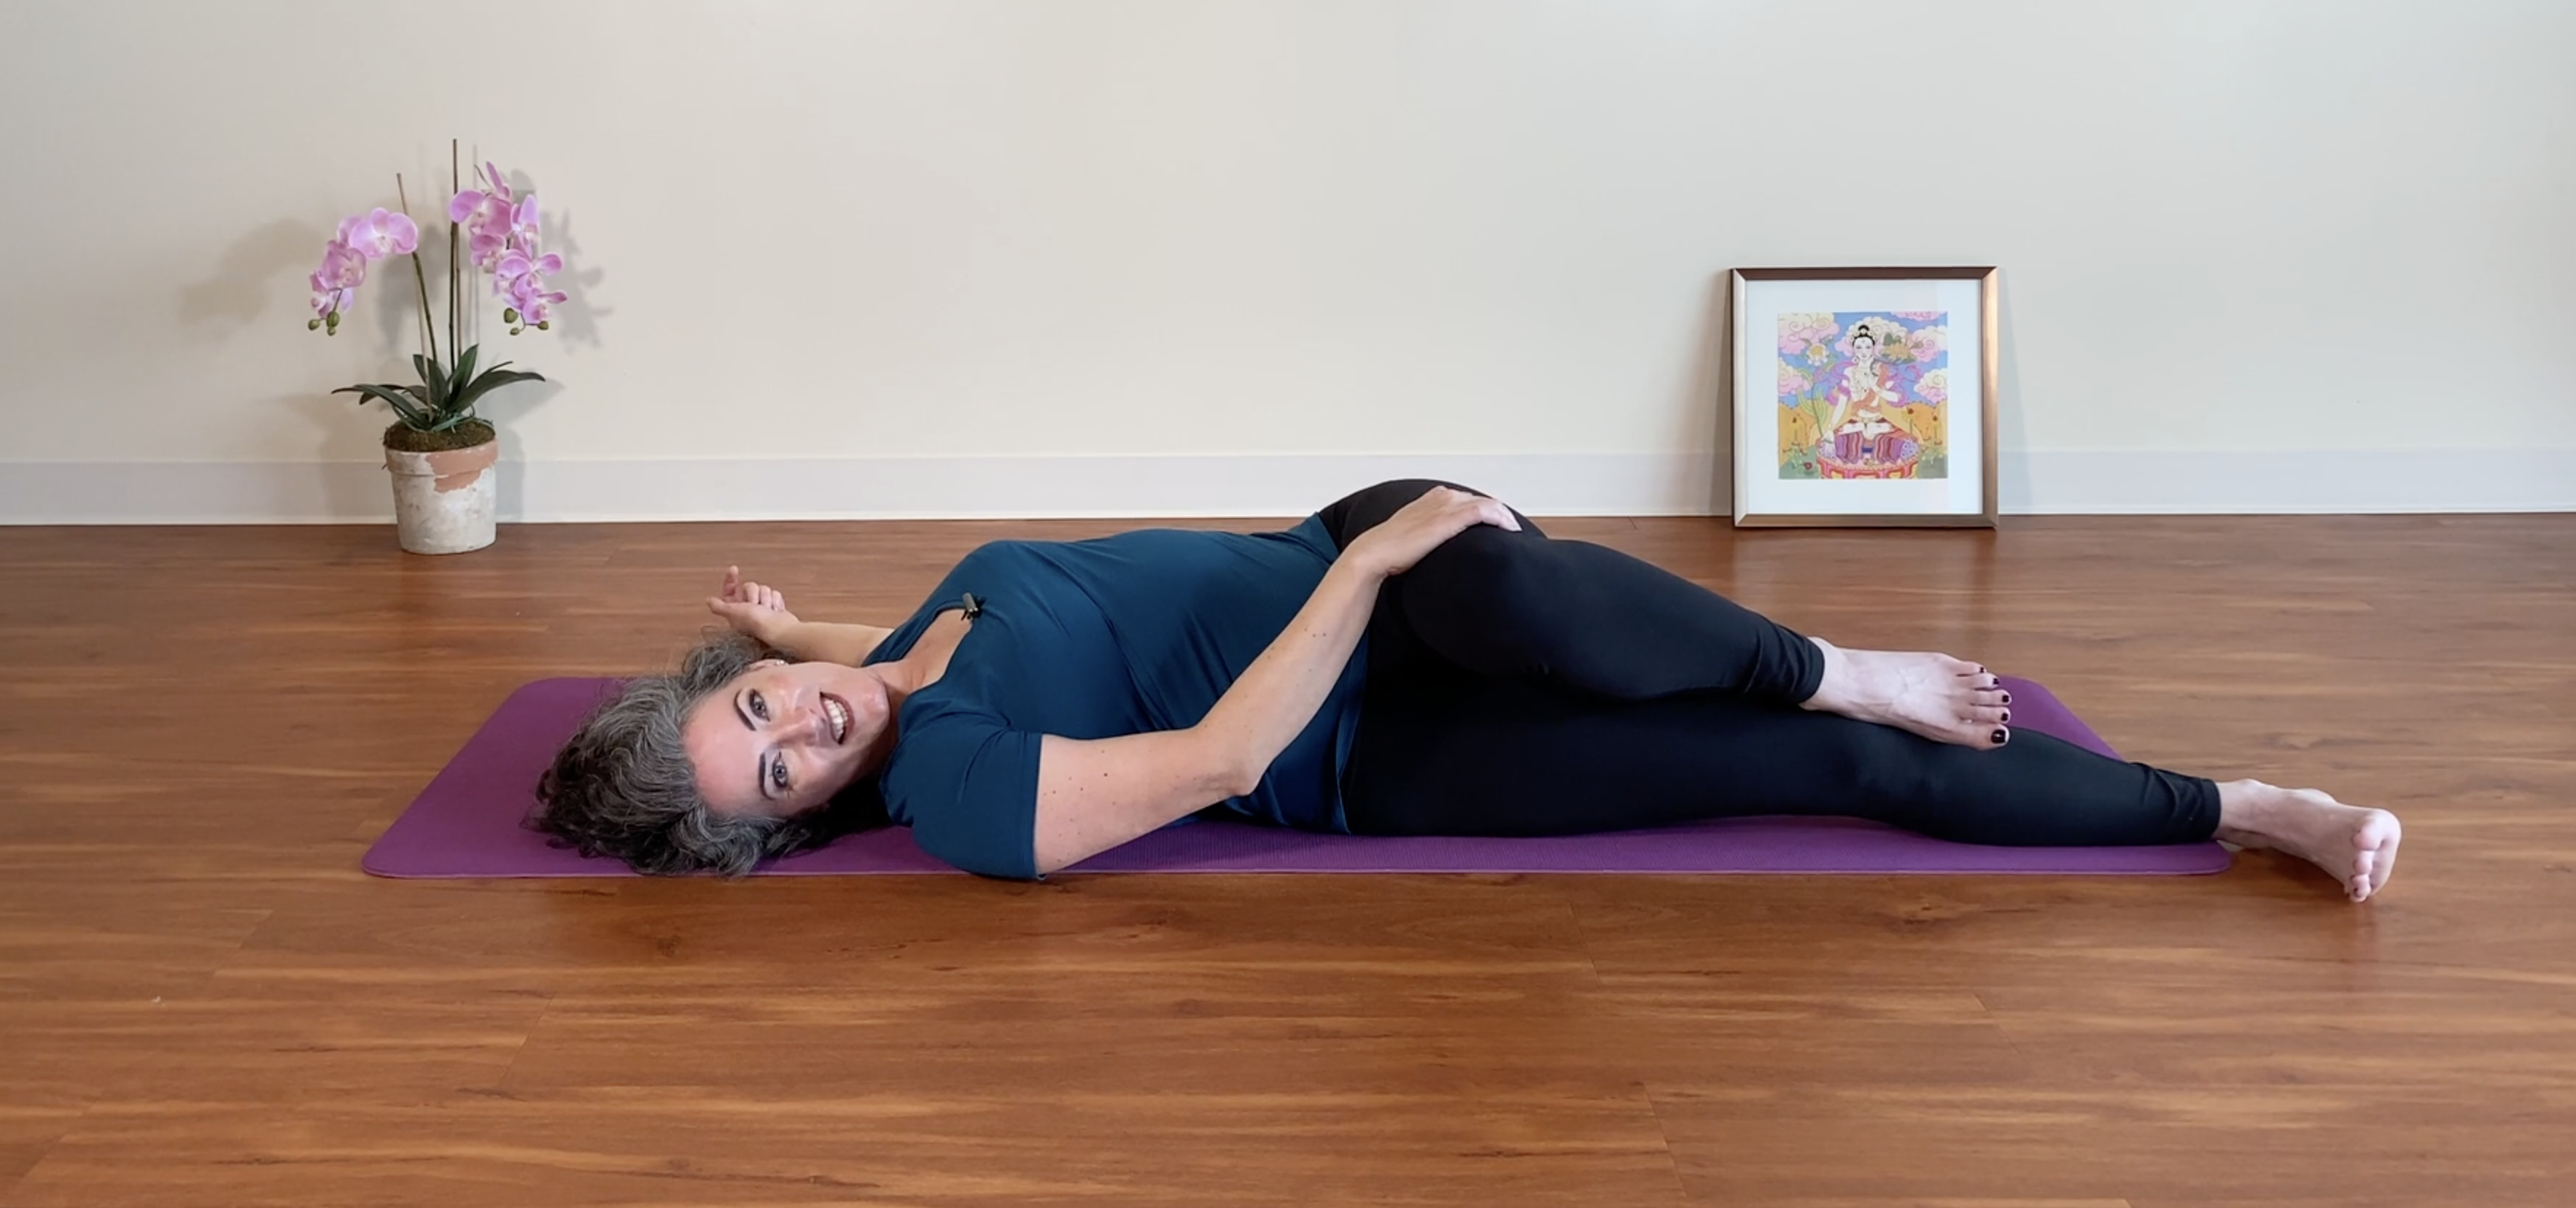 Watch: Six Moves of the Spine, Supine, One Leg